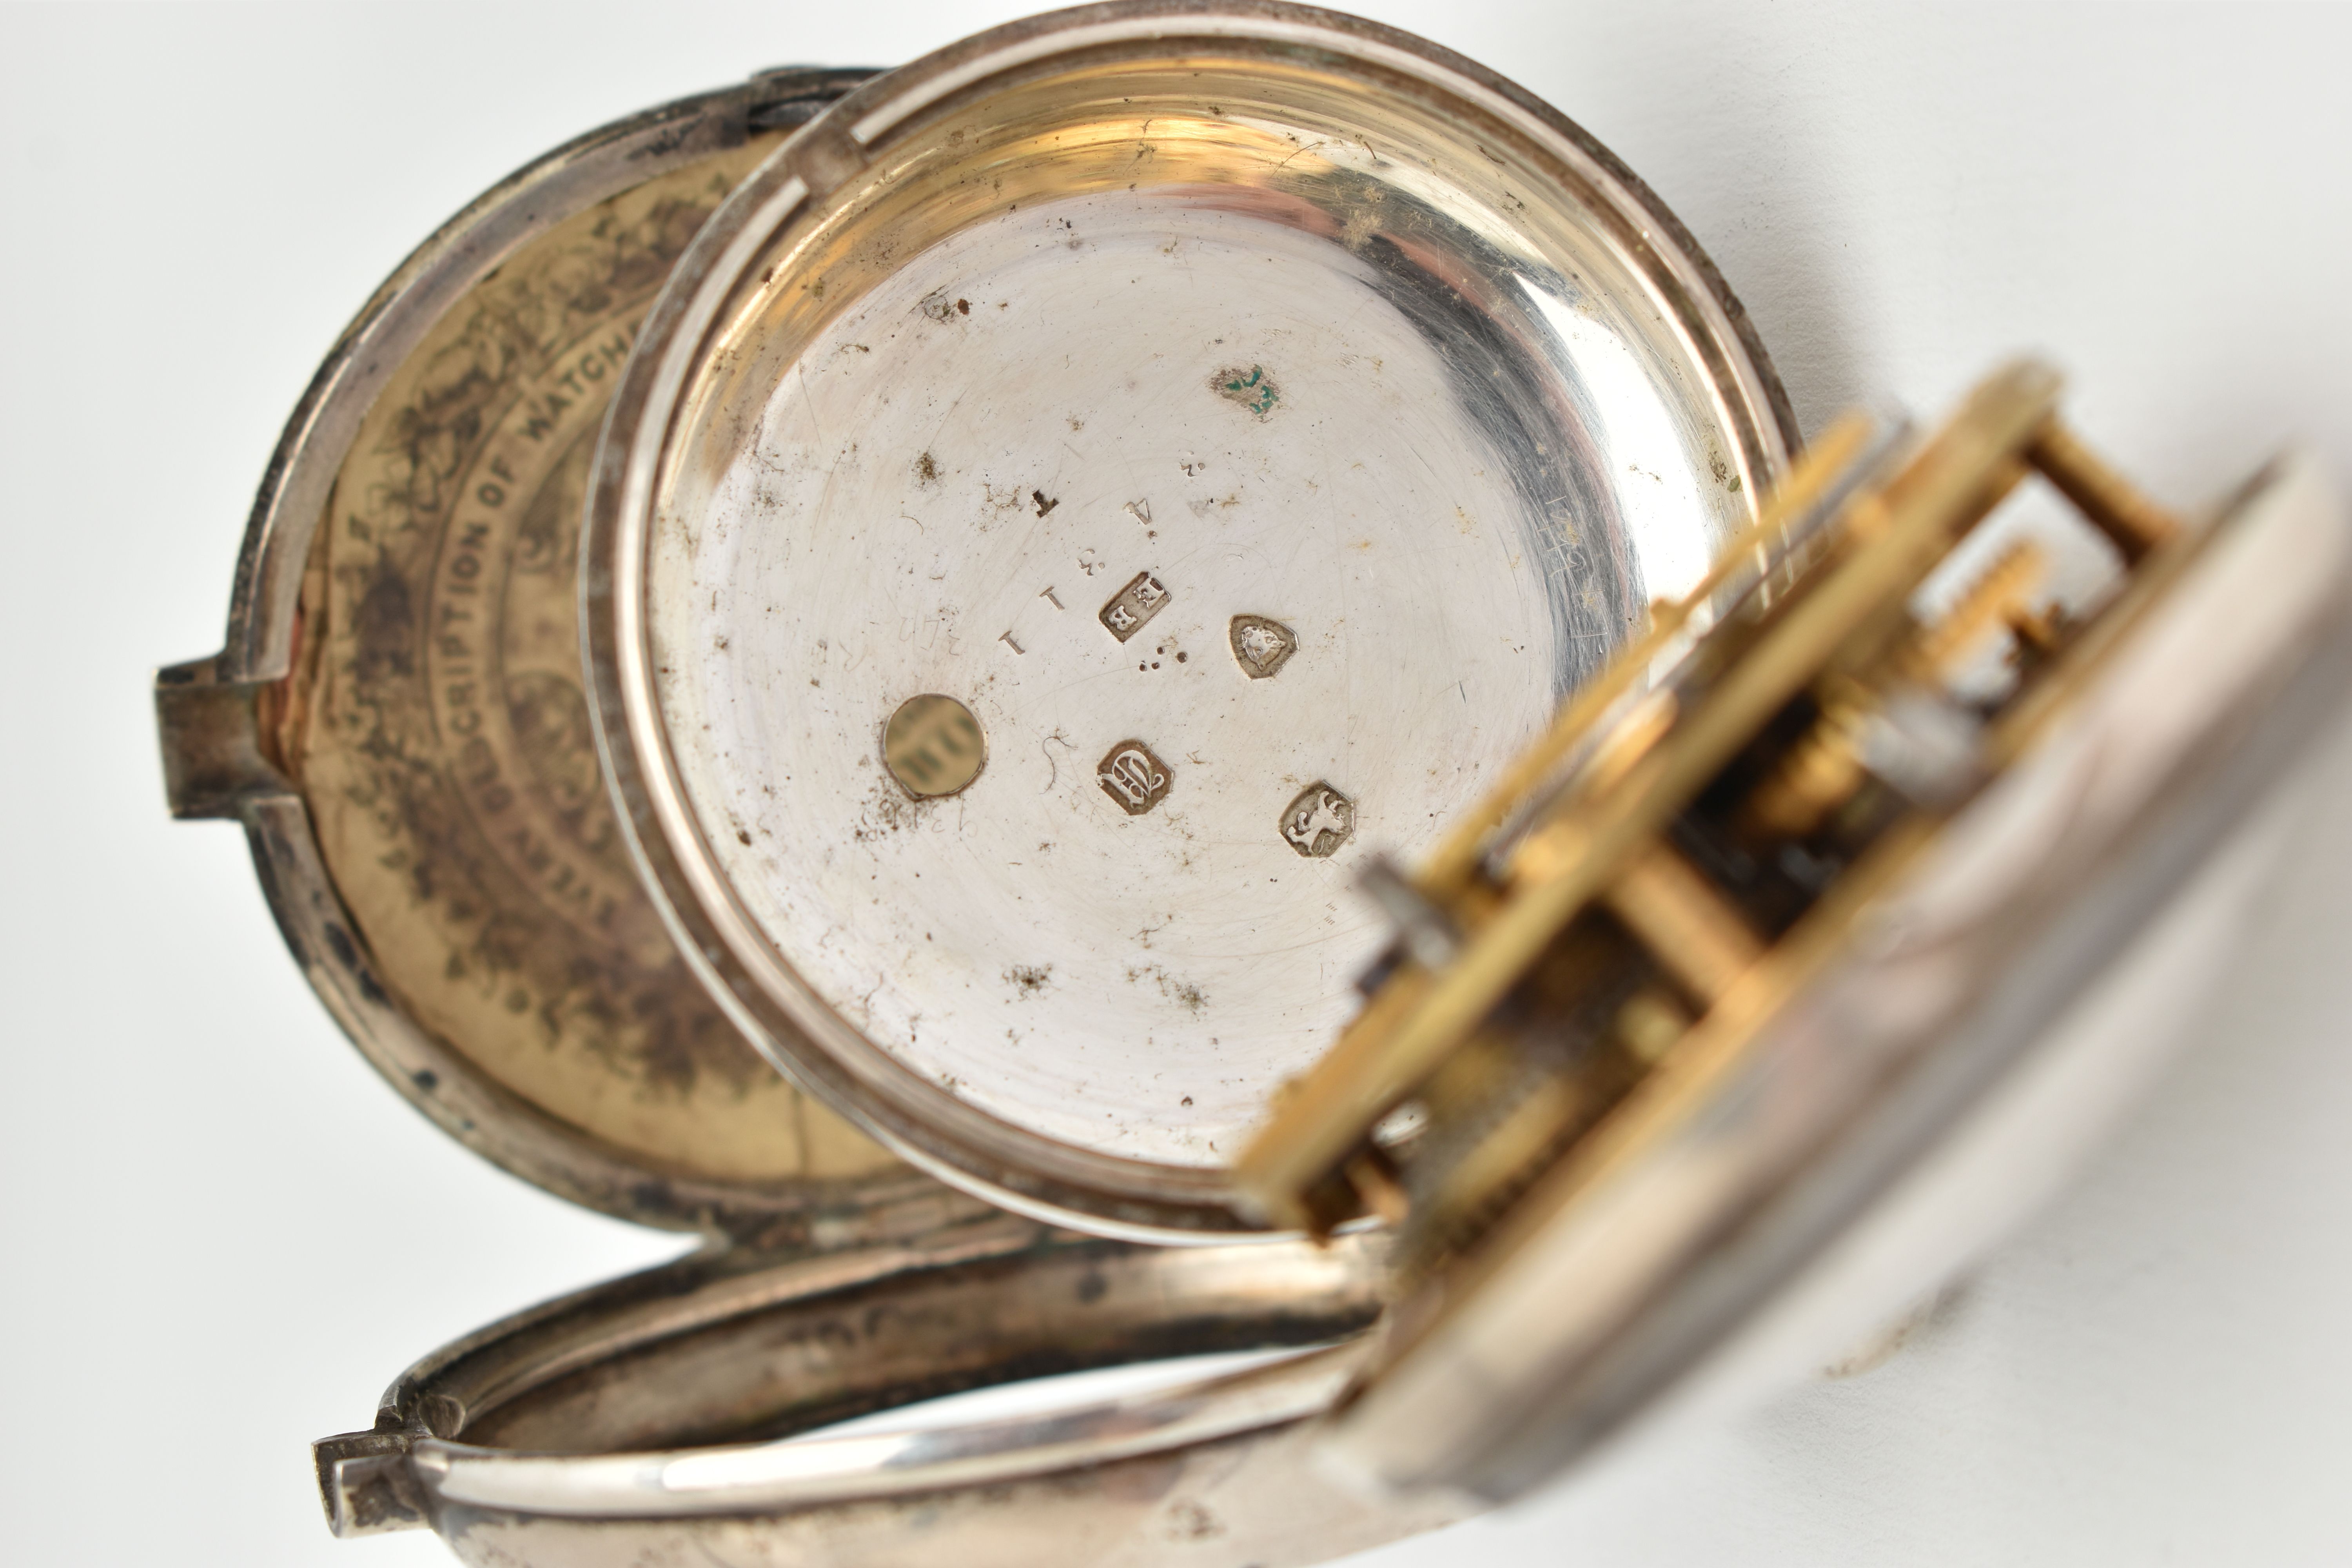 A SILVER PAIR CASE POCKET WATCH, key wound movement, round dial, Roman numerals, plain silver - Image 7 of 7